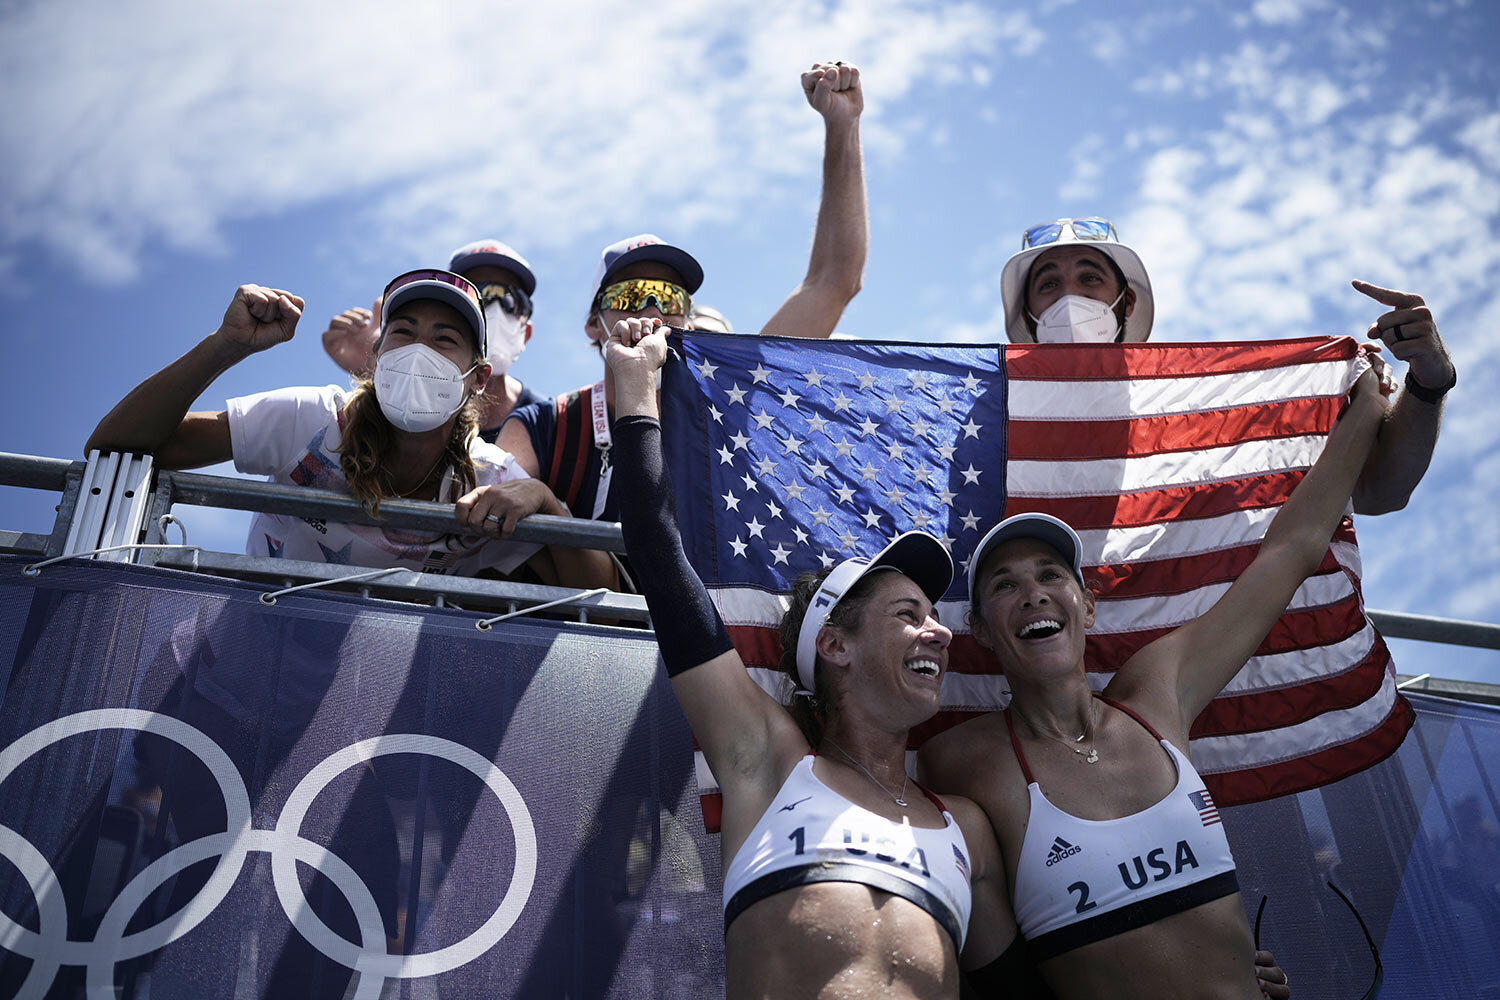  April Ross, left, of the United States, and teammate Alix Klineman celebrate winning a women's beach volleyball Gold Medal match against Australia at the 2020 Summer Olympics, Friday, Aug. 6, 2021, in Tokyo, Japan. (AP Photo/Felipe Dana) 